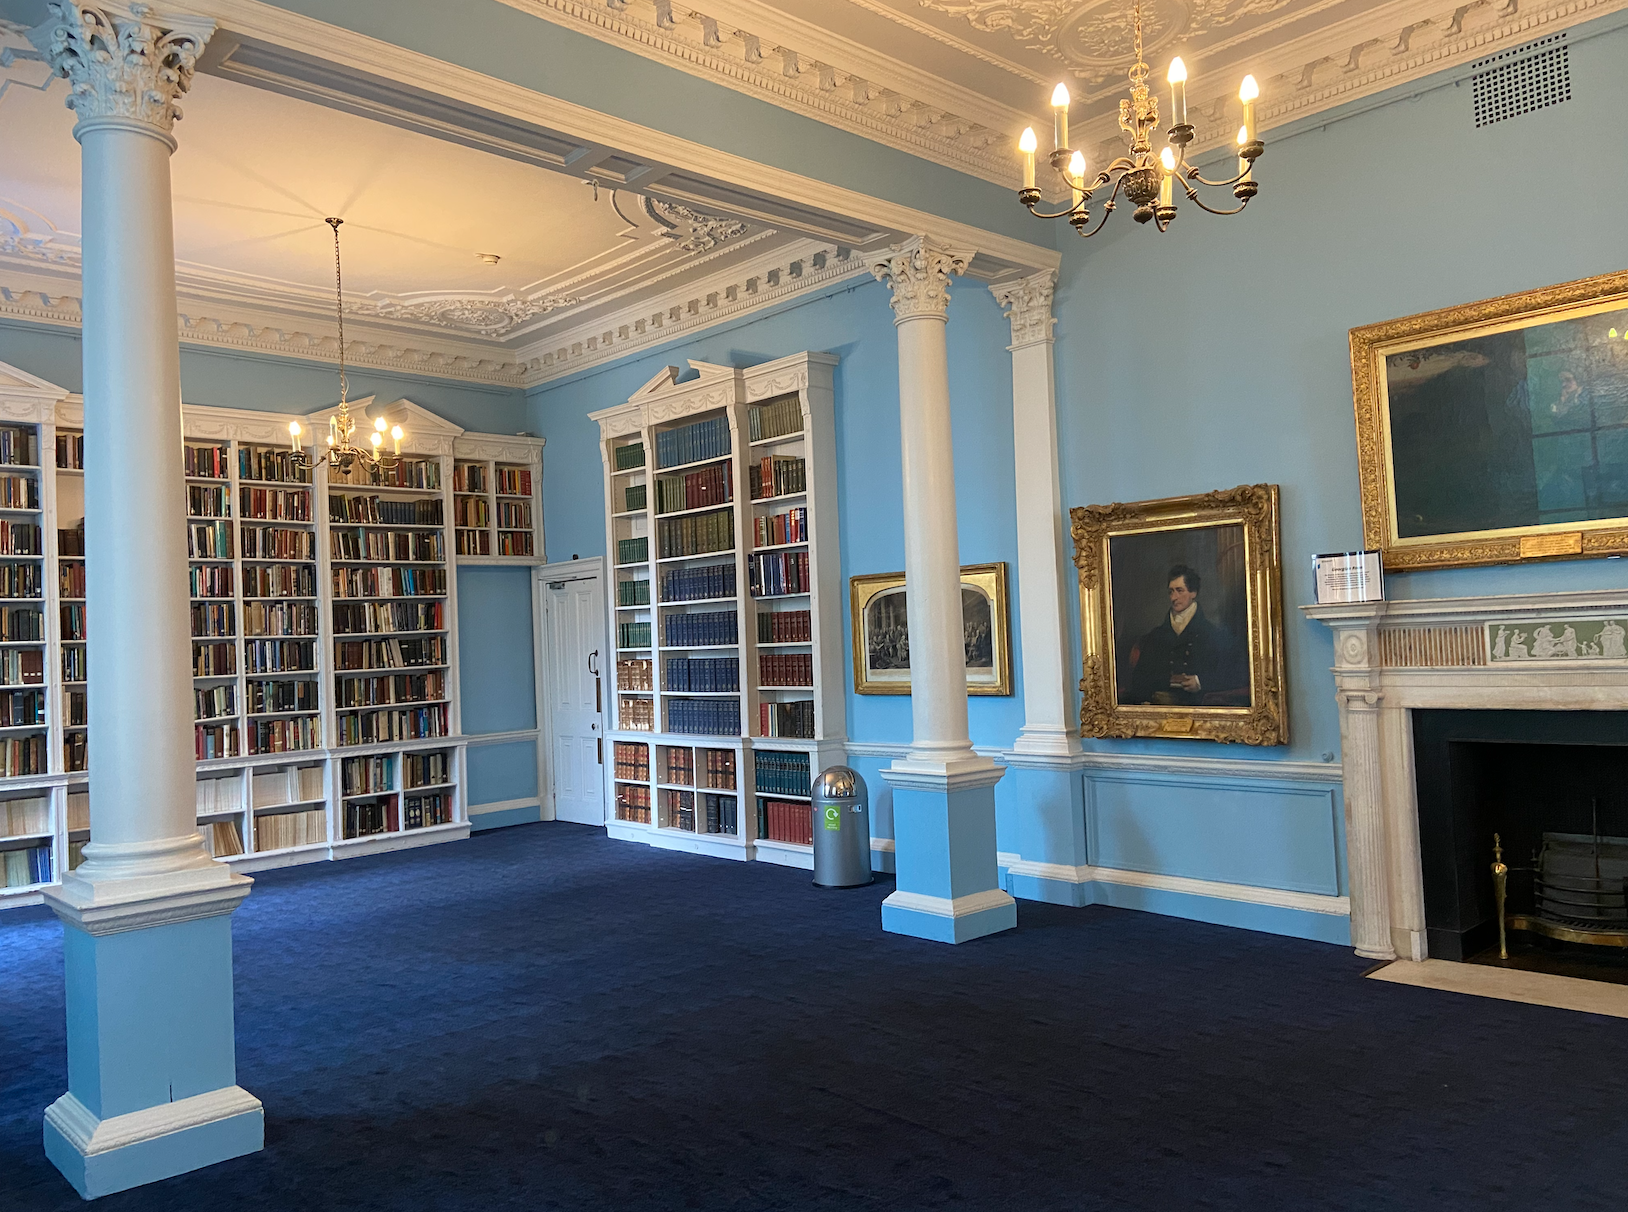 Library with light blue wallpaper, dark blue carpet flooring, three full bookcases, two white columns, a white and black fireplace, two chandeliers and three paintings on the walls